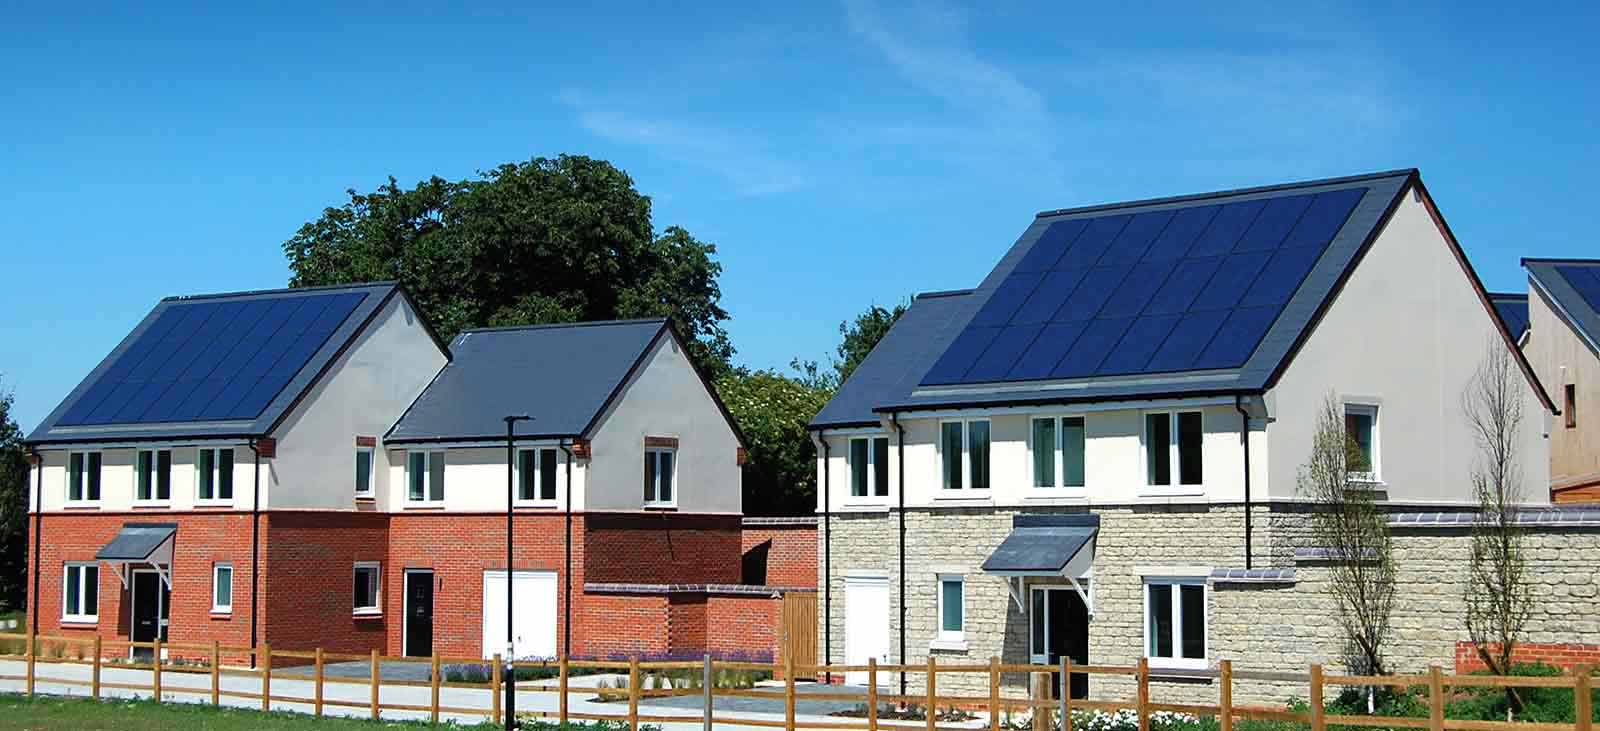 Solar panels on a new build home